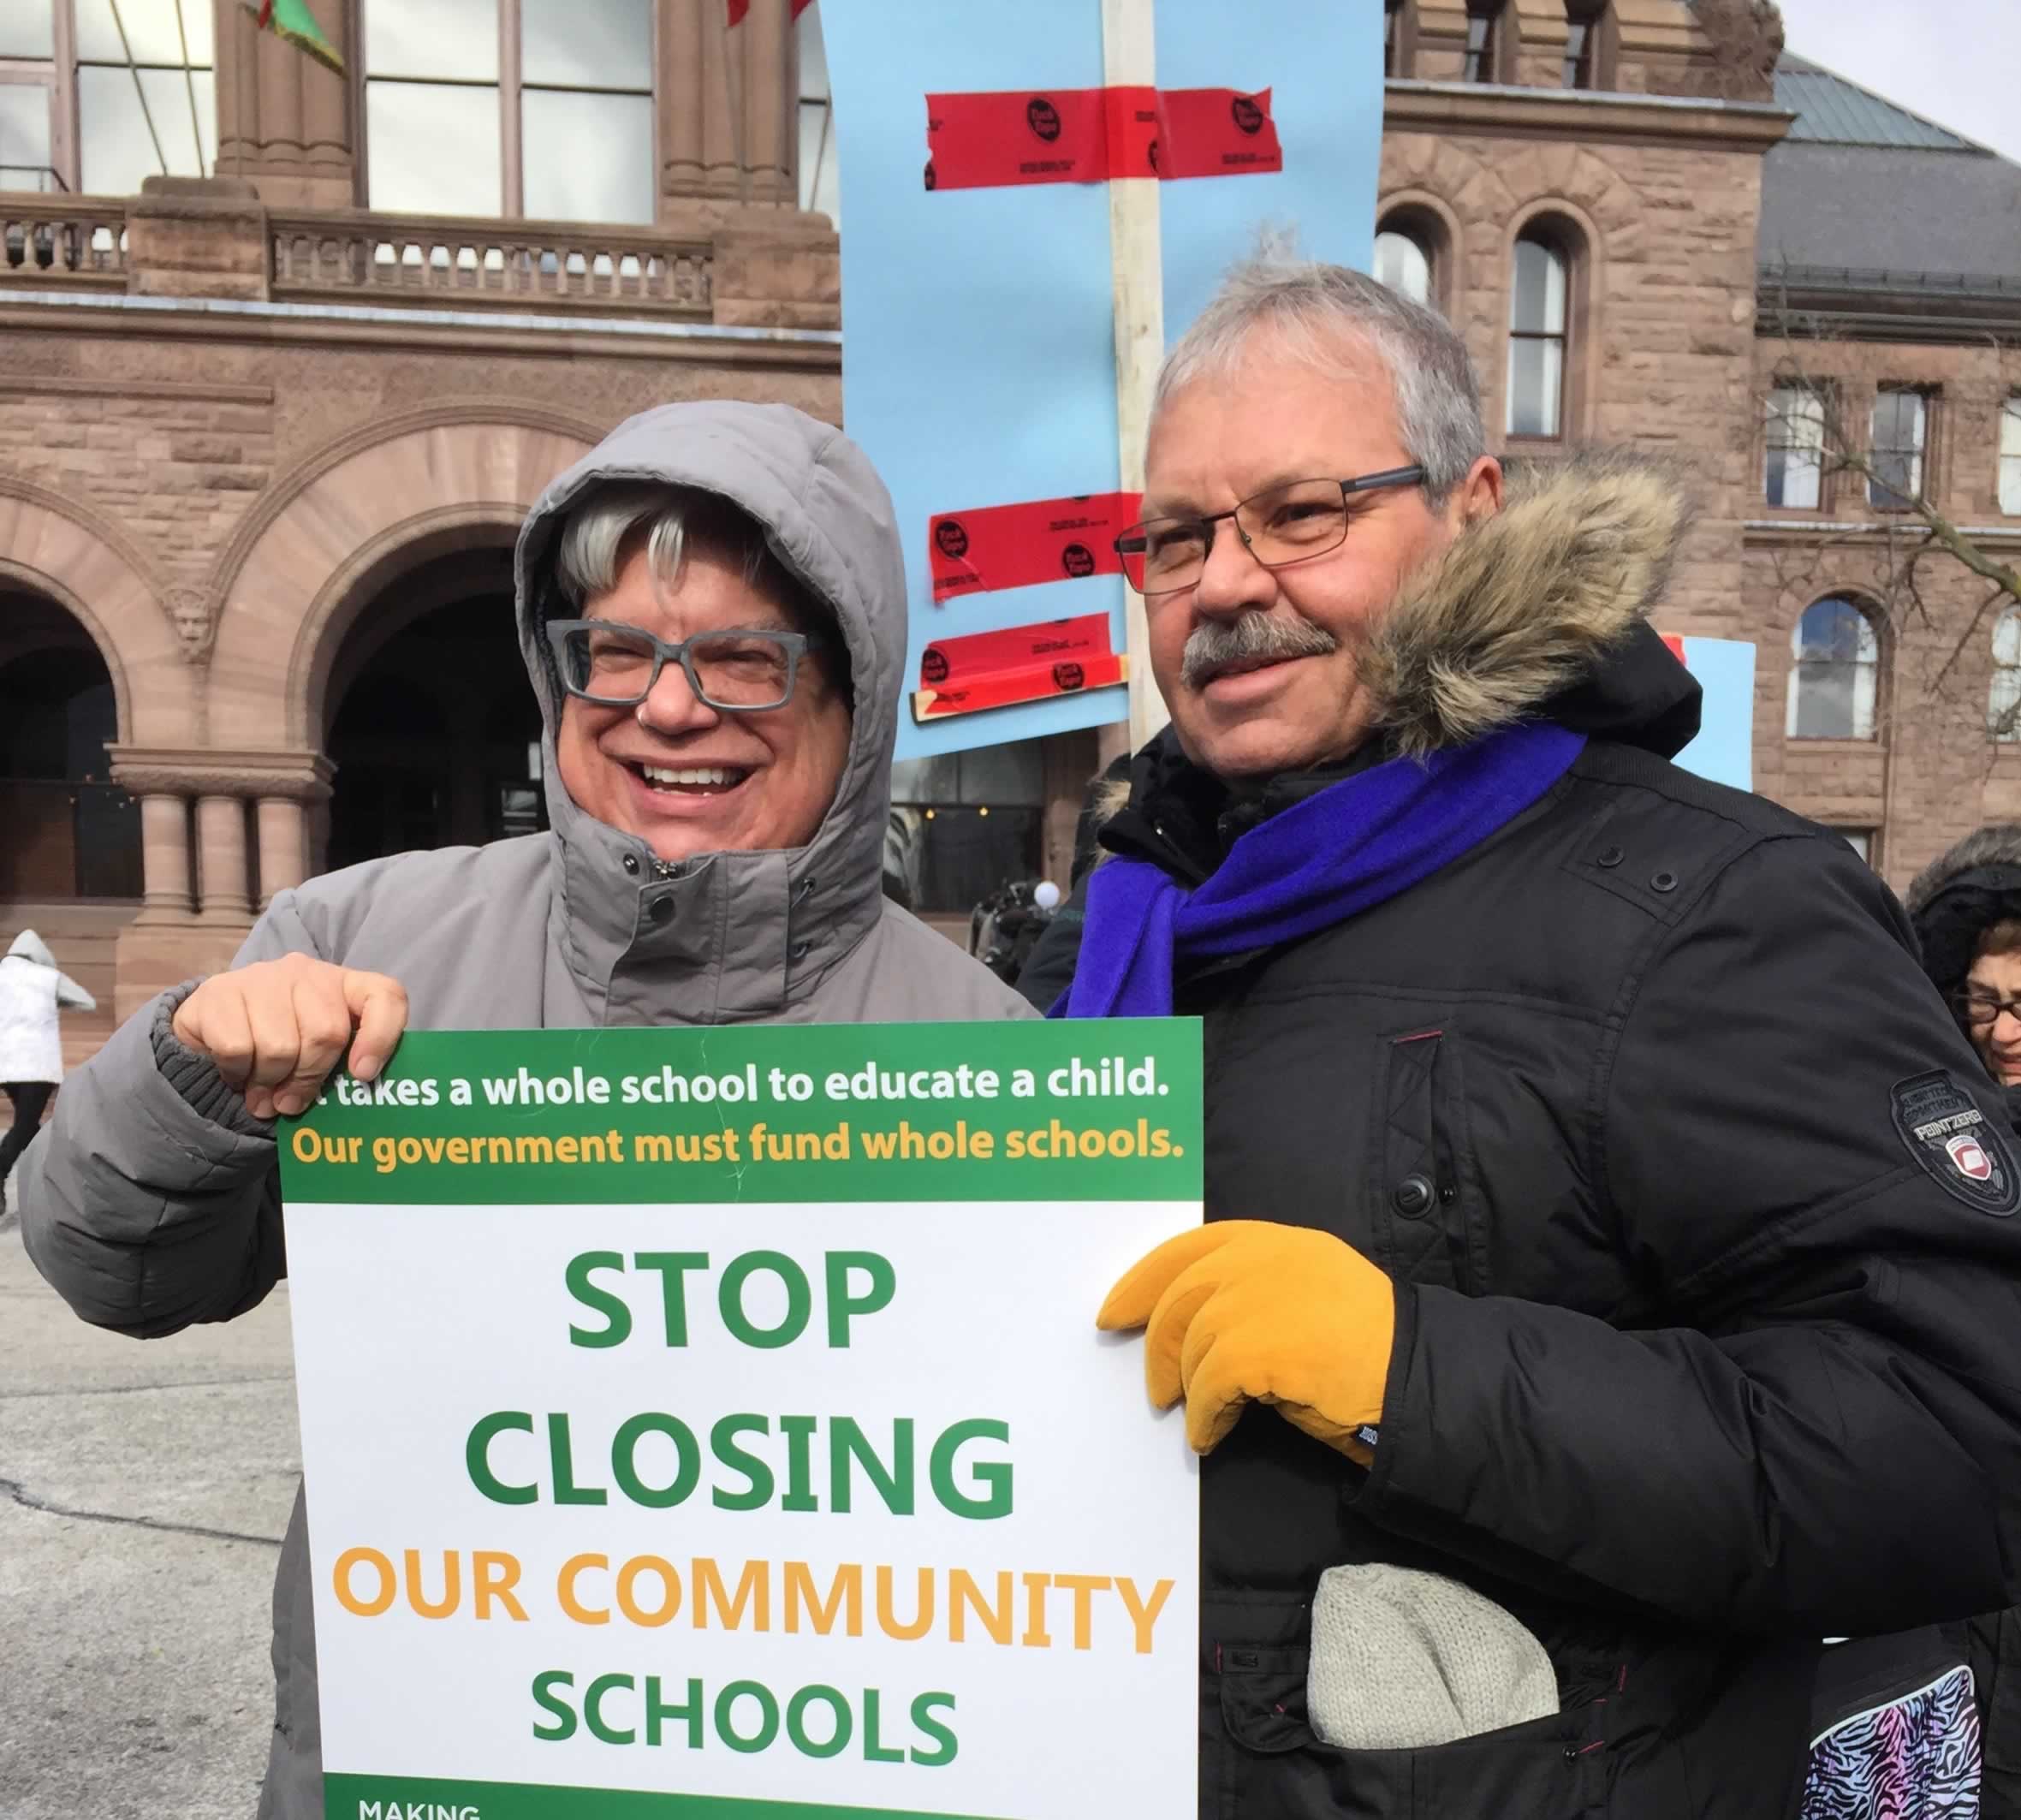 OPSEU President Warren (Smokey) Thomas and CUPE Ontario President Fred Hahn hold a sign that says "Stop closing our community schools"